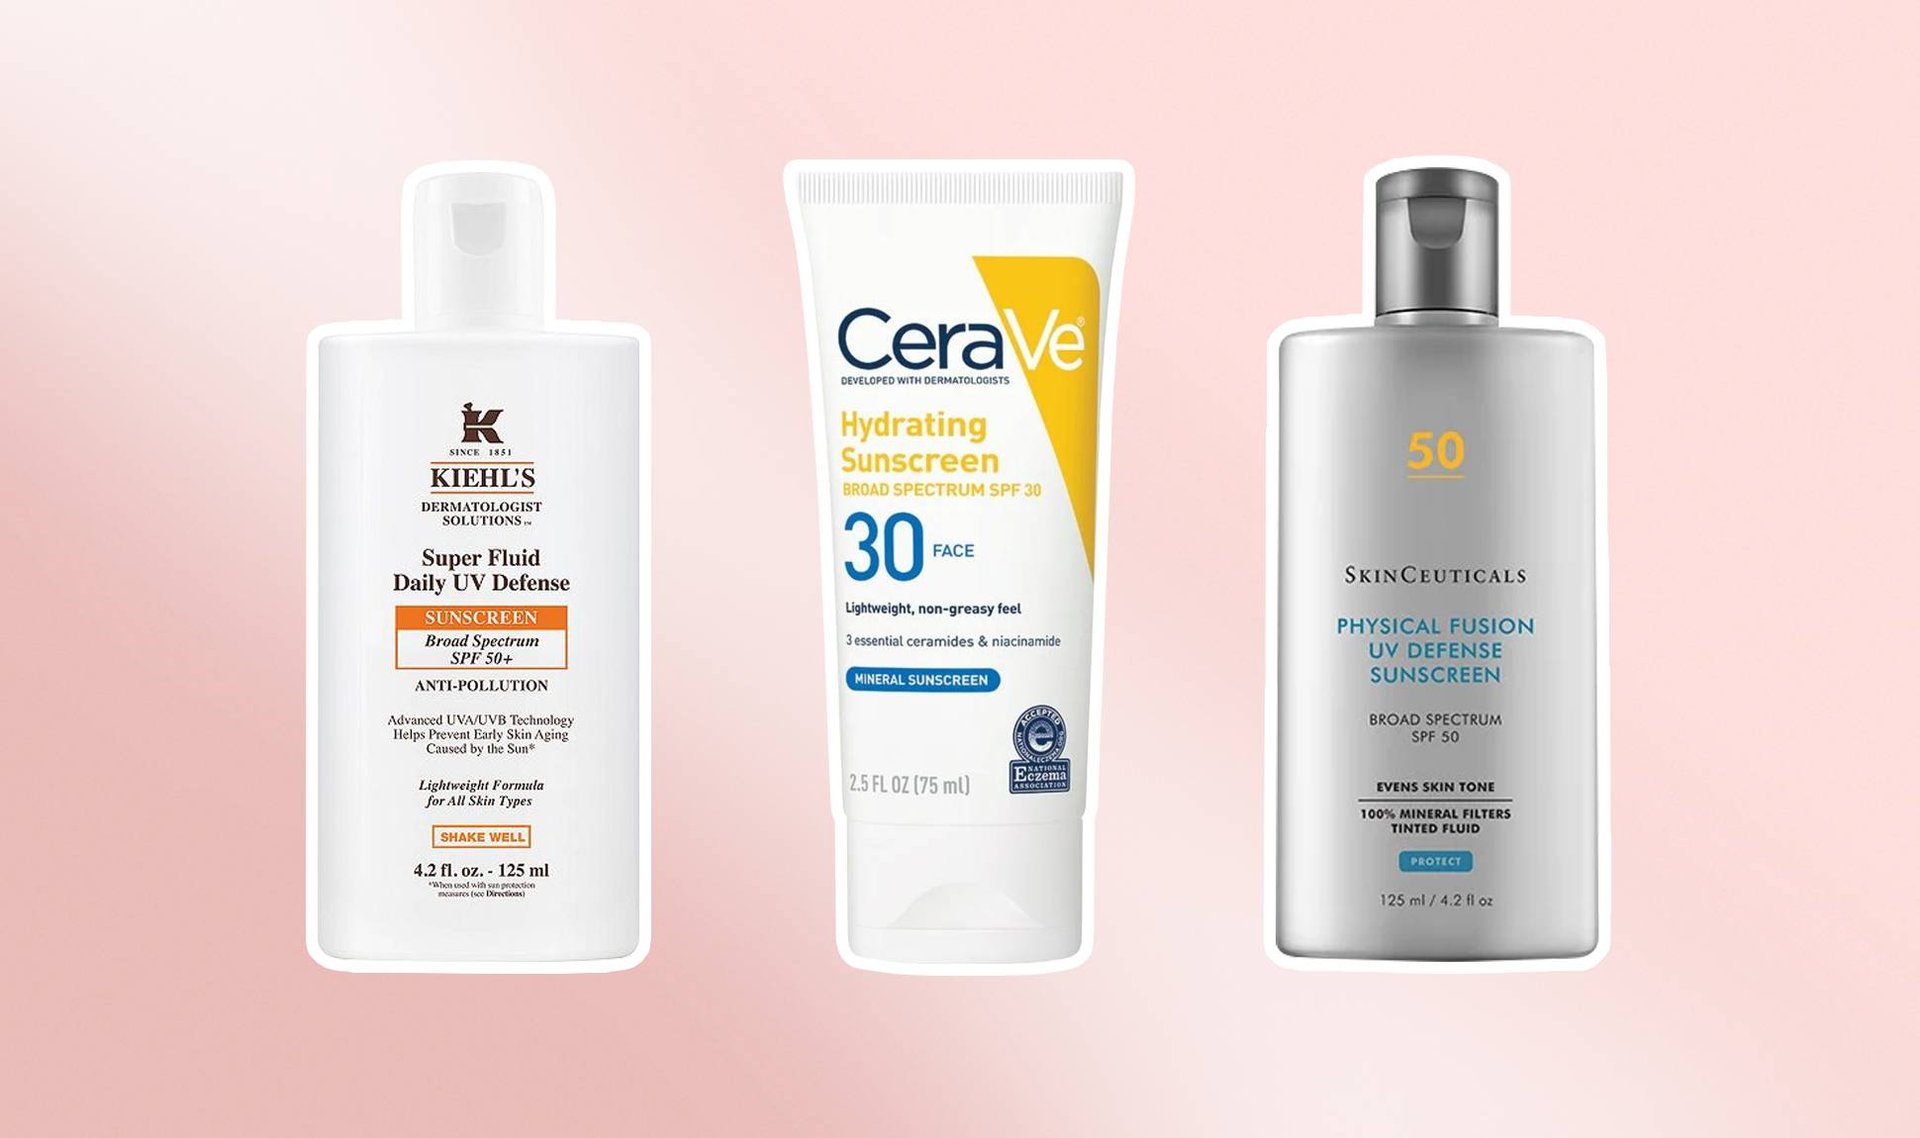 Non-Comedogenic Sunscreens for Clear, Protected and Grease-Free Skin